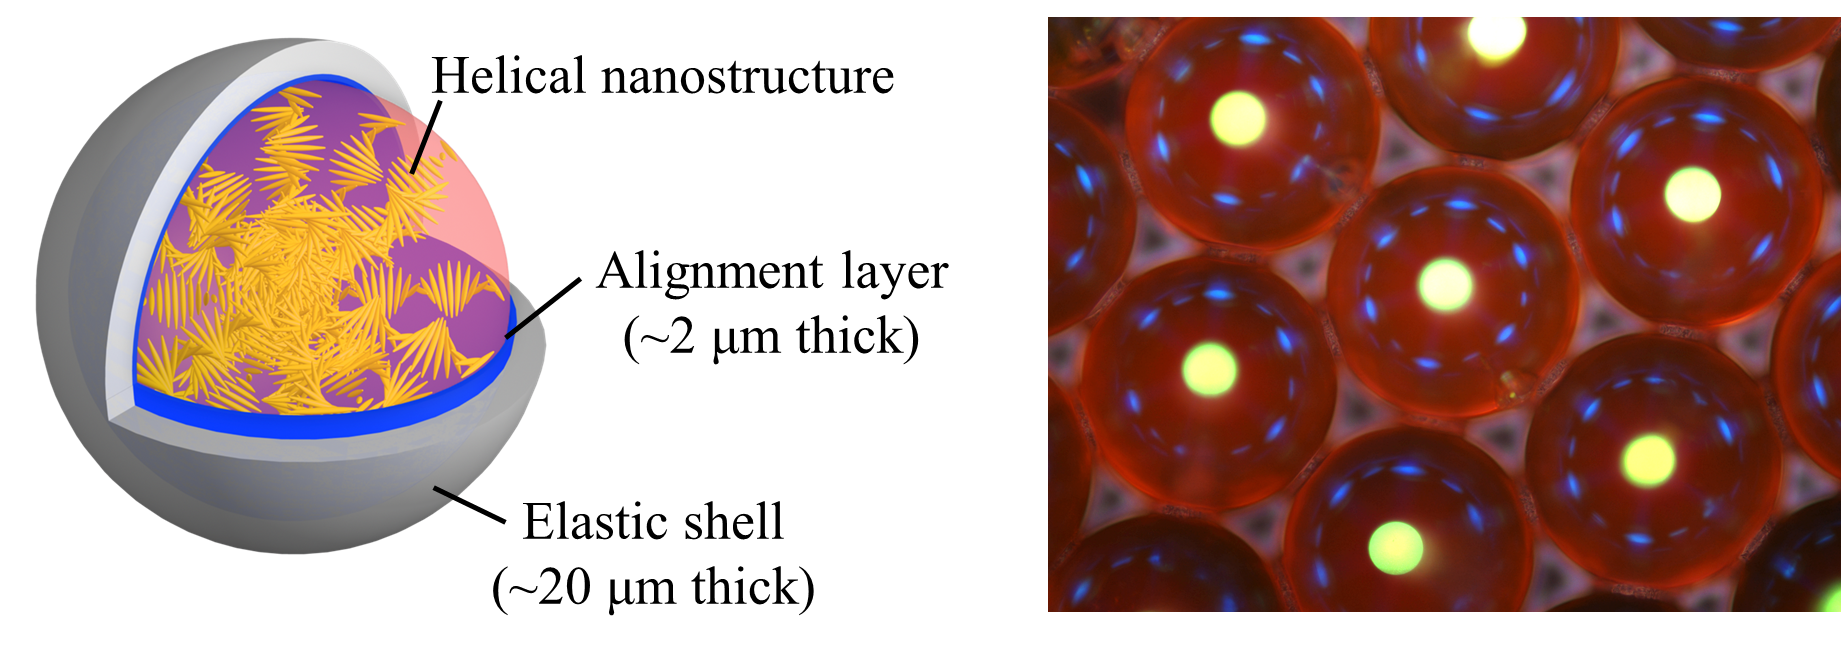 Figure 2. Composition (left panel) and optical microscopy image (right panel) of the capsule-type laser resonator